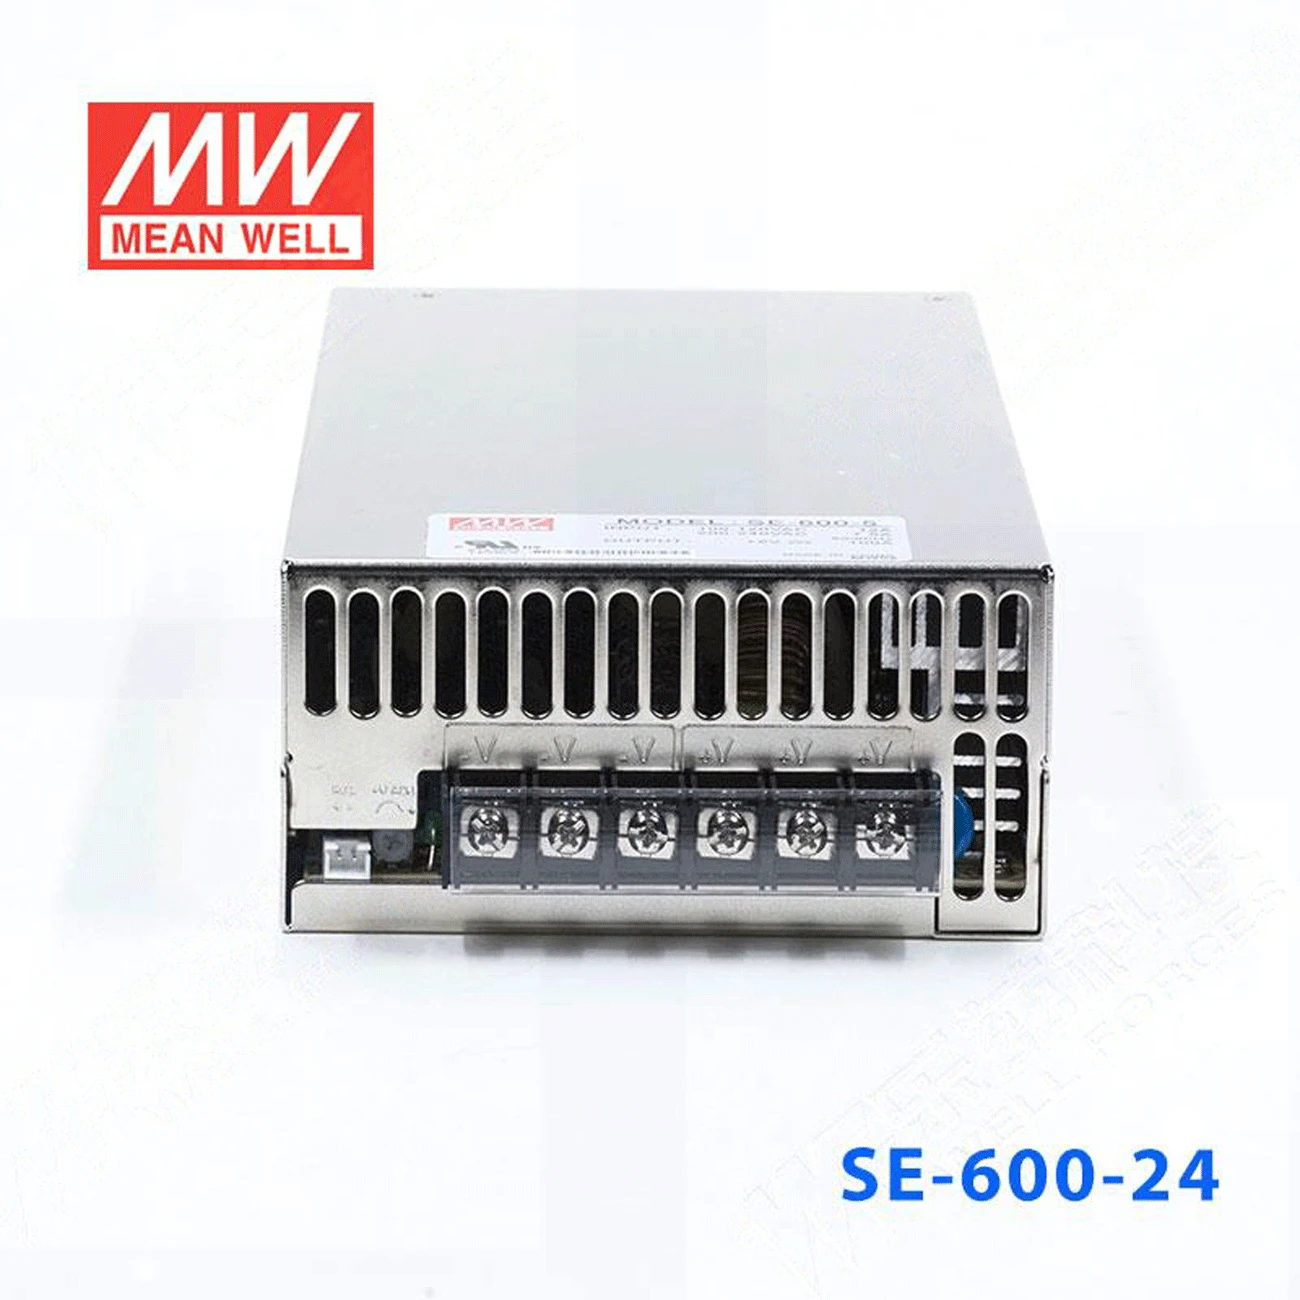 

transmit MEAN WELL Taiwan SE-600 48V/5V/12V/15V/24V/27V/36V 600W high-power switching power supply replace S